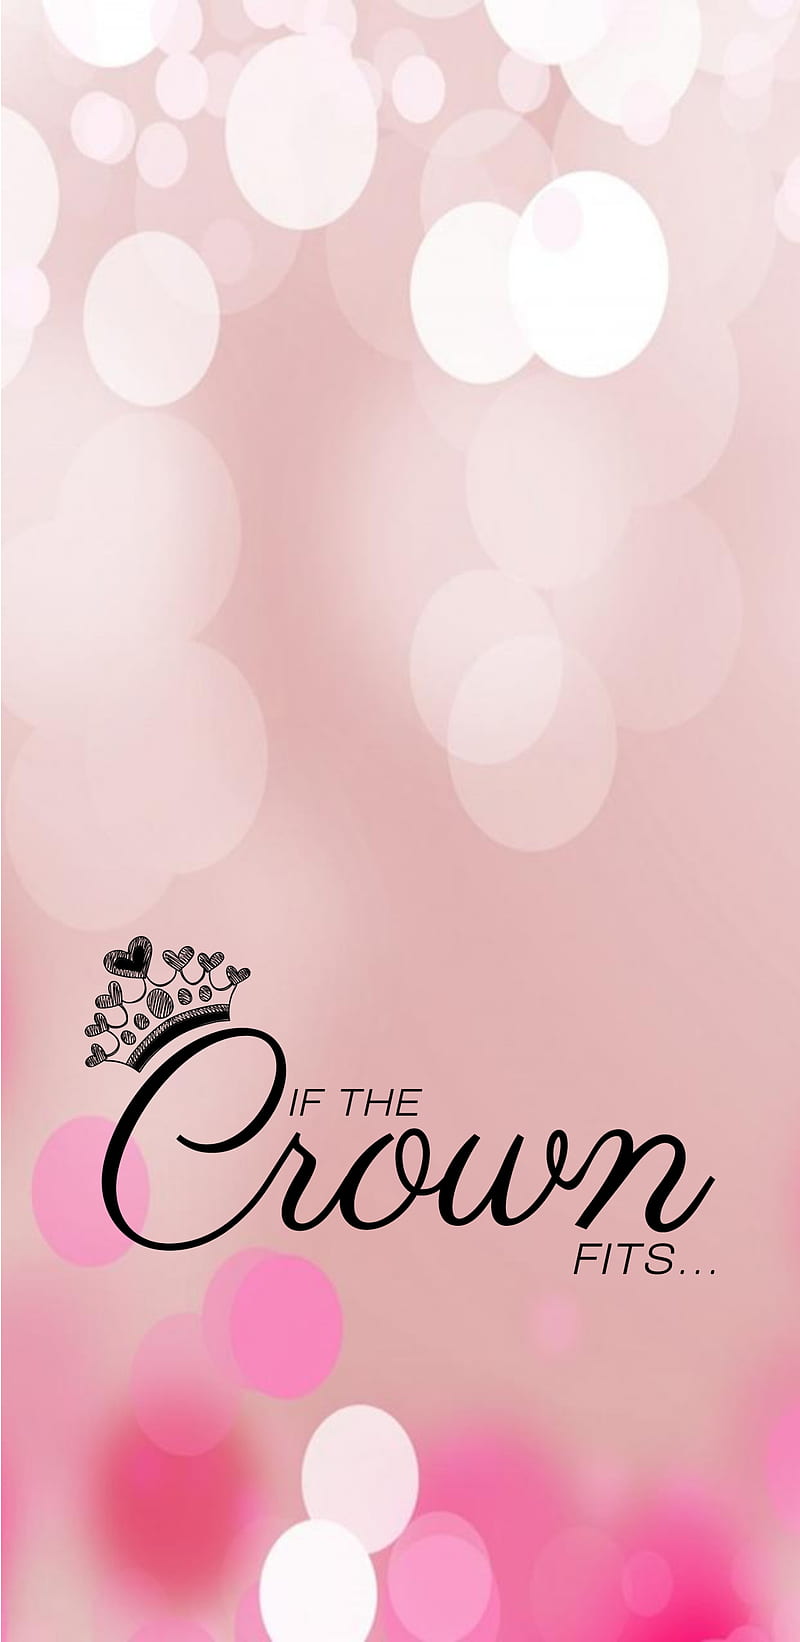 If the Crown fits logo on a pink background - Blush